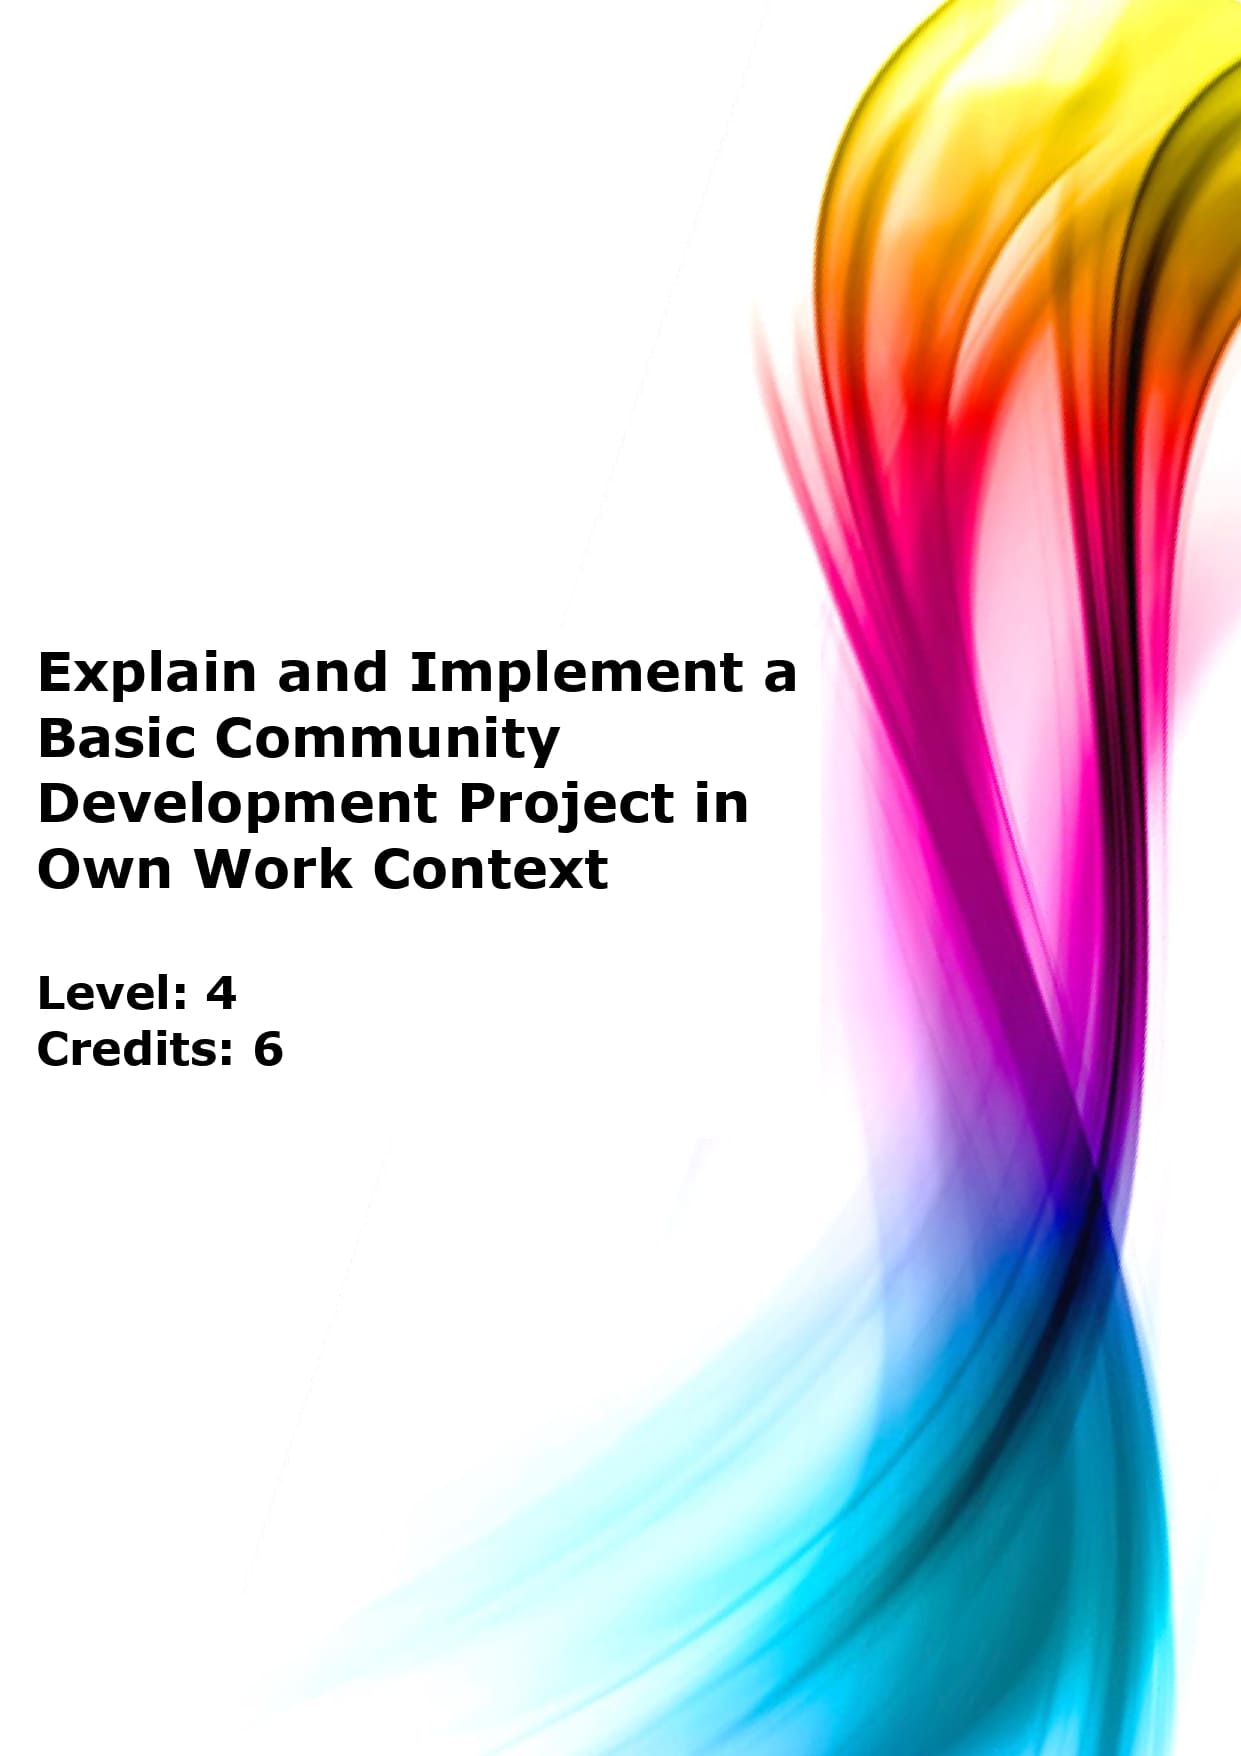 Explain and implement a basic community development project in own work context US